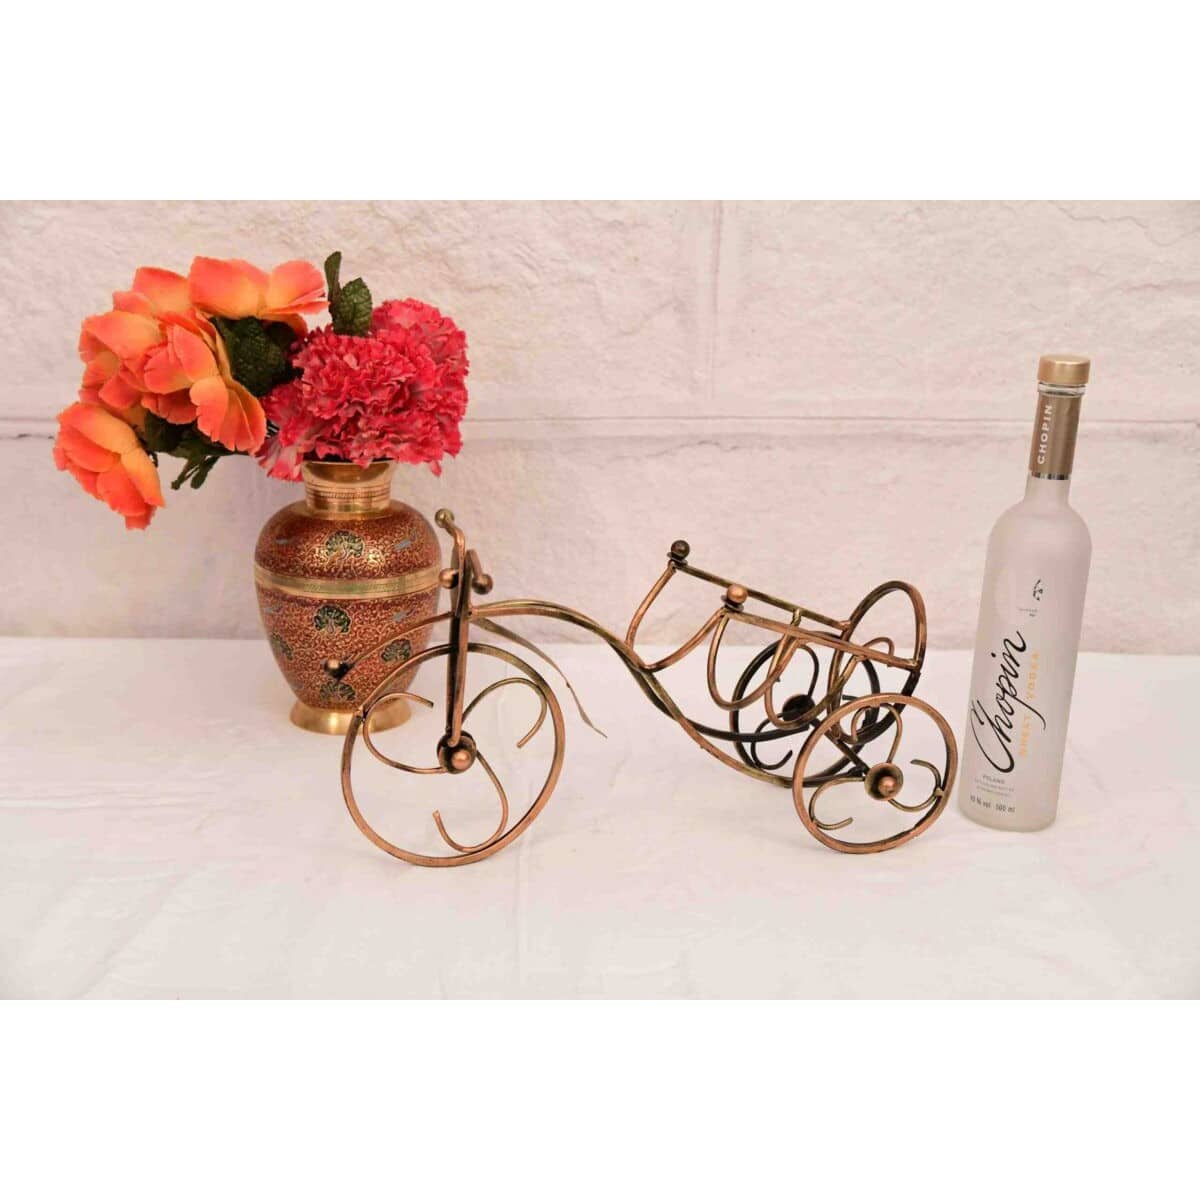 Cool Retro Look Iron Bagghi Style Bottle Stand 002